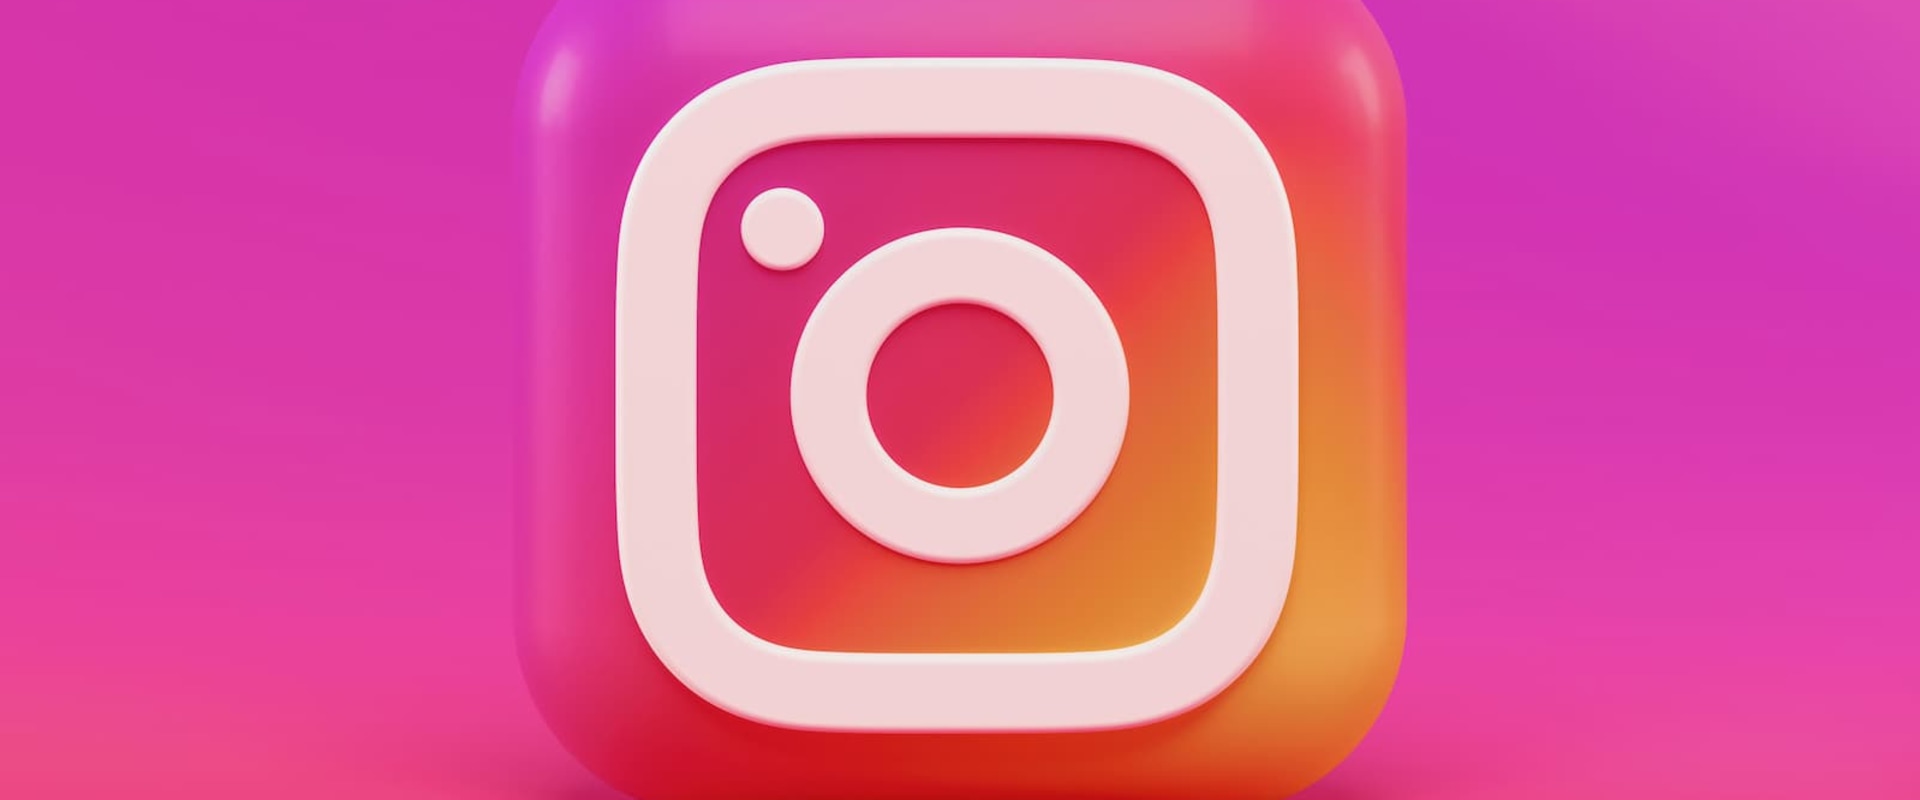 Unfollowing Someone on Instagram: A Step-by-Step Guide